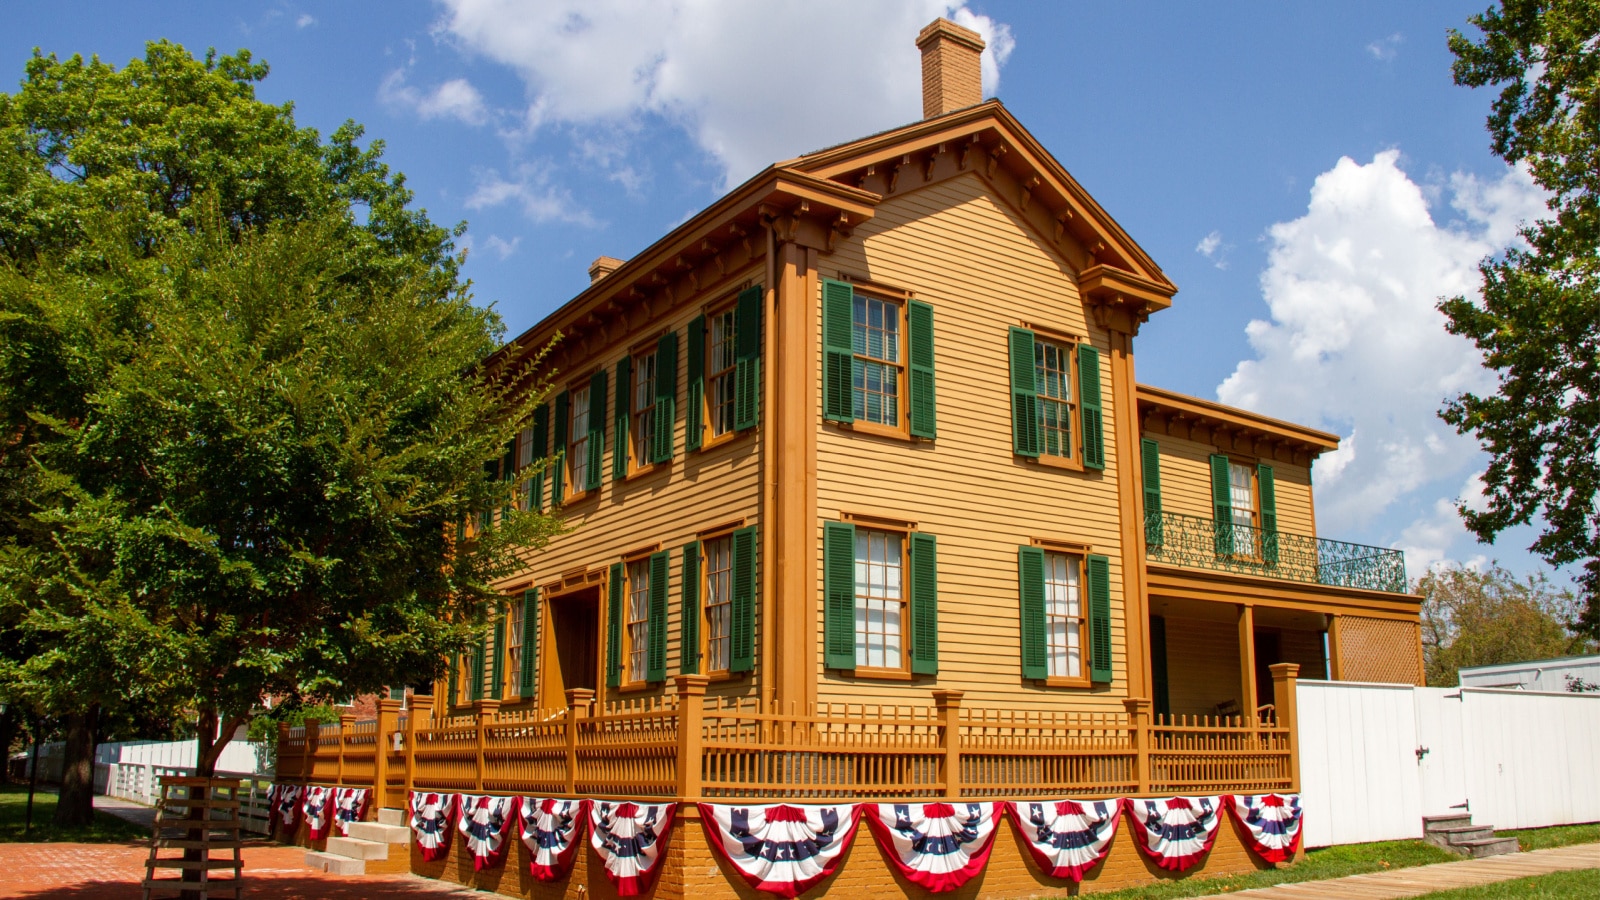 Abraham Lincoln's home in Springfield, Illinois